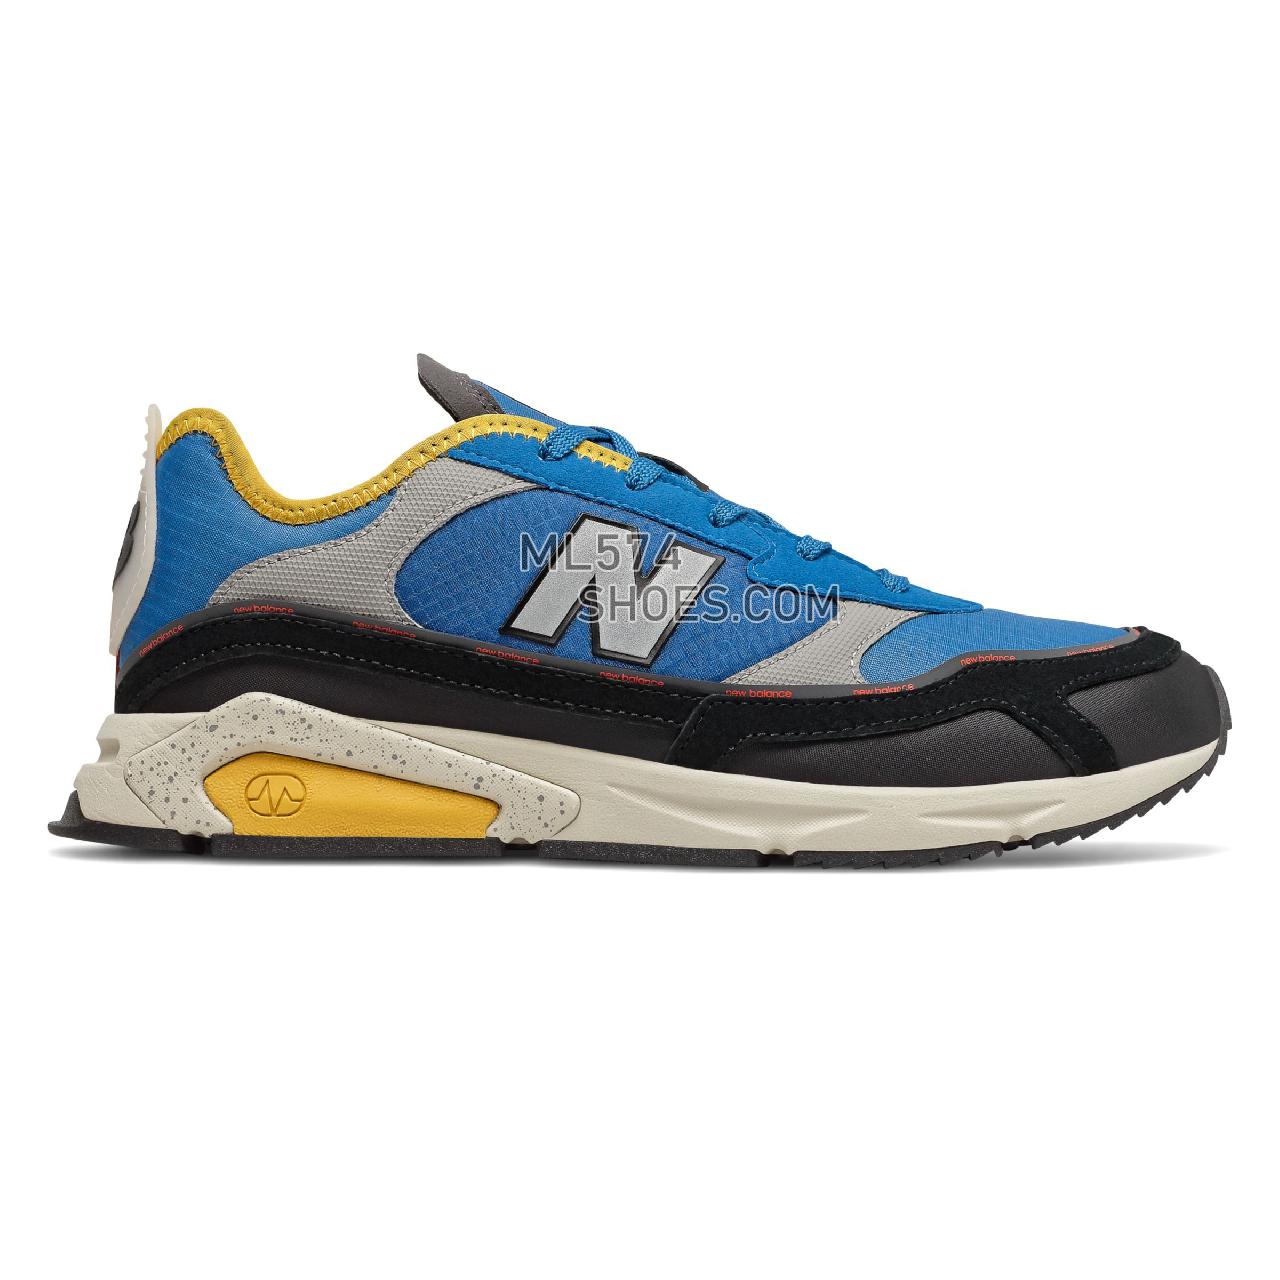 New Balance X-Racer - Men's Sport Style Sneakers - Neo Classic Blue with Black and Varsity Gold - MSXRCHSD